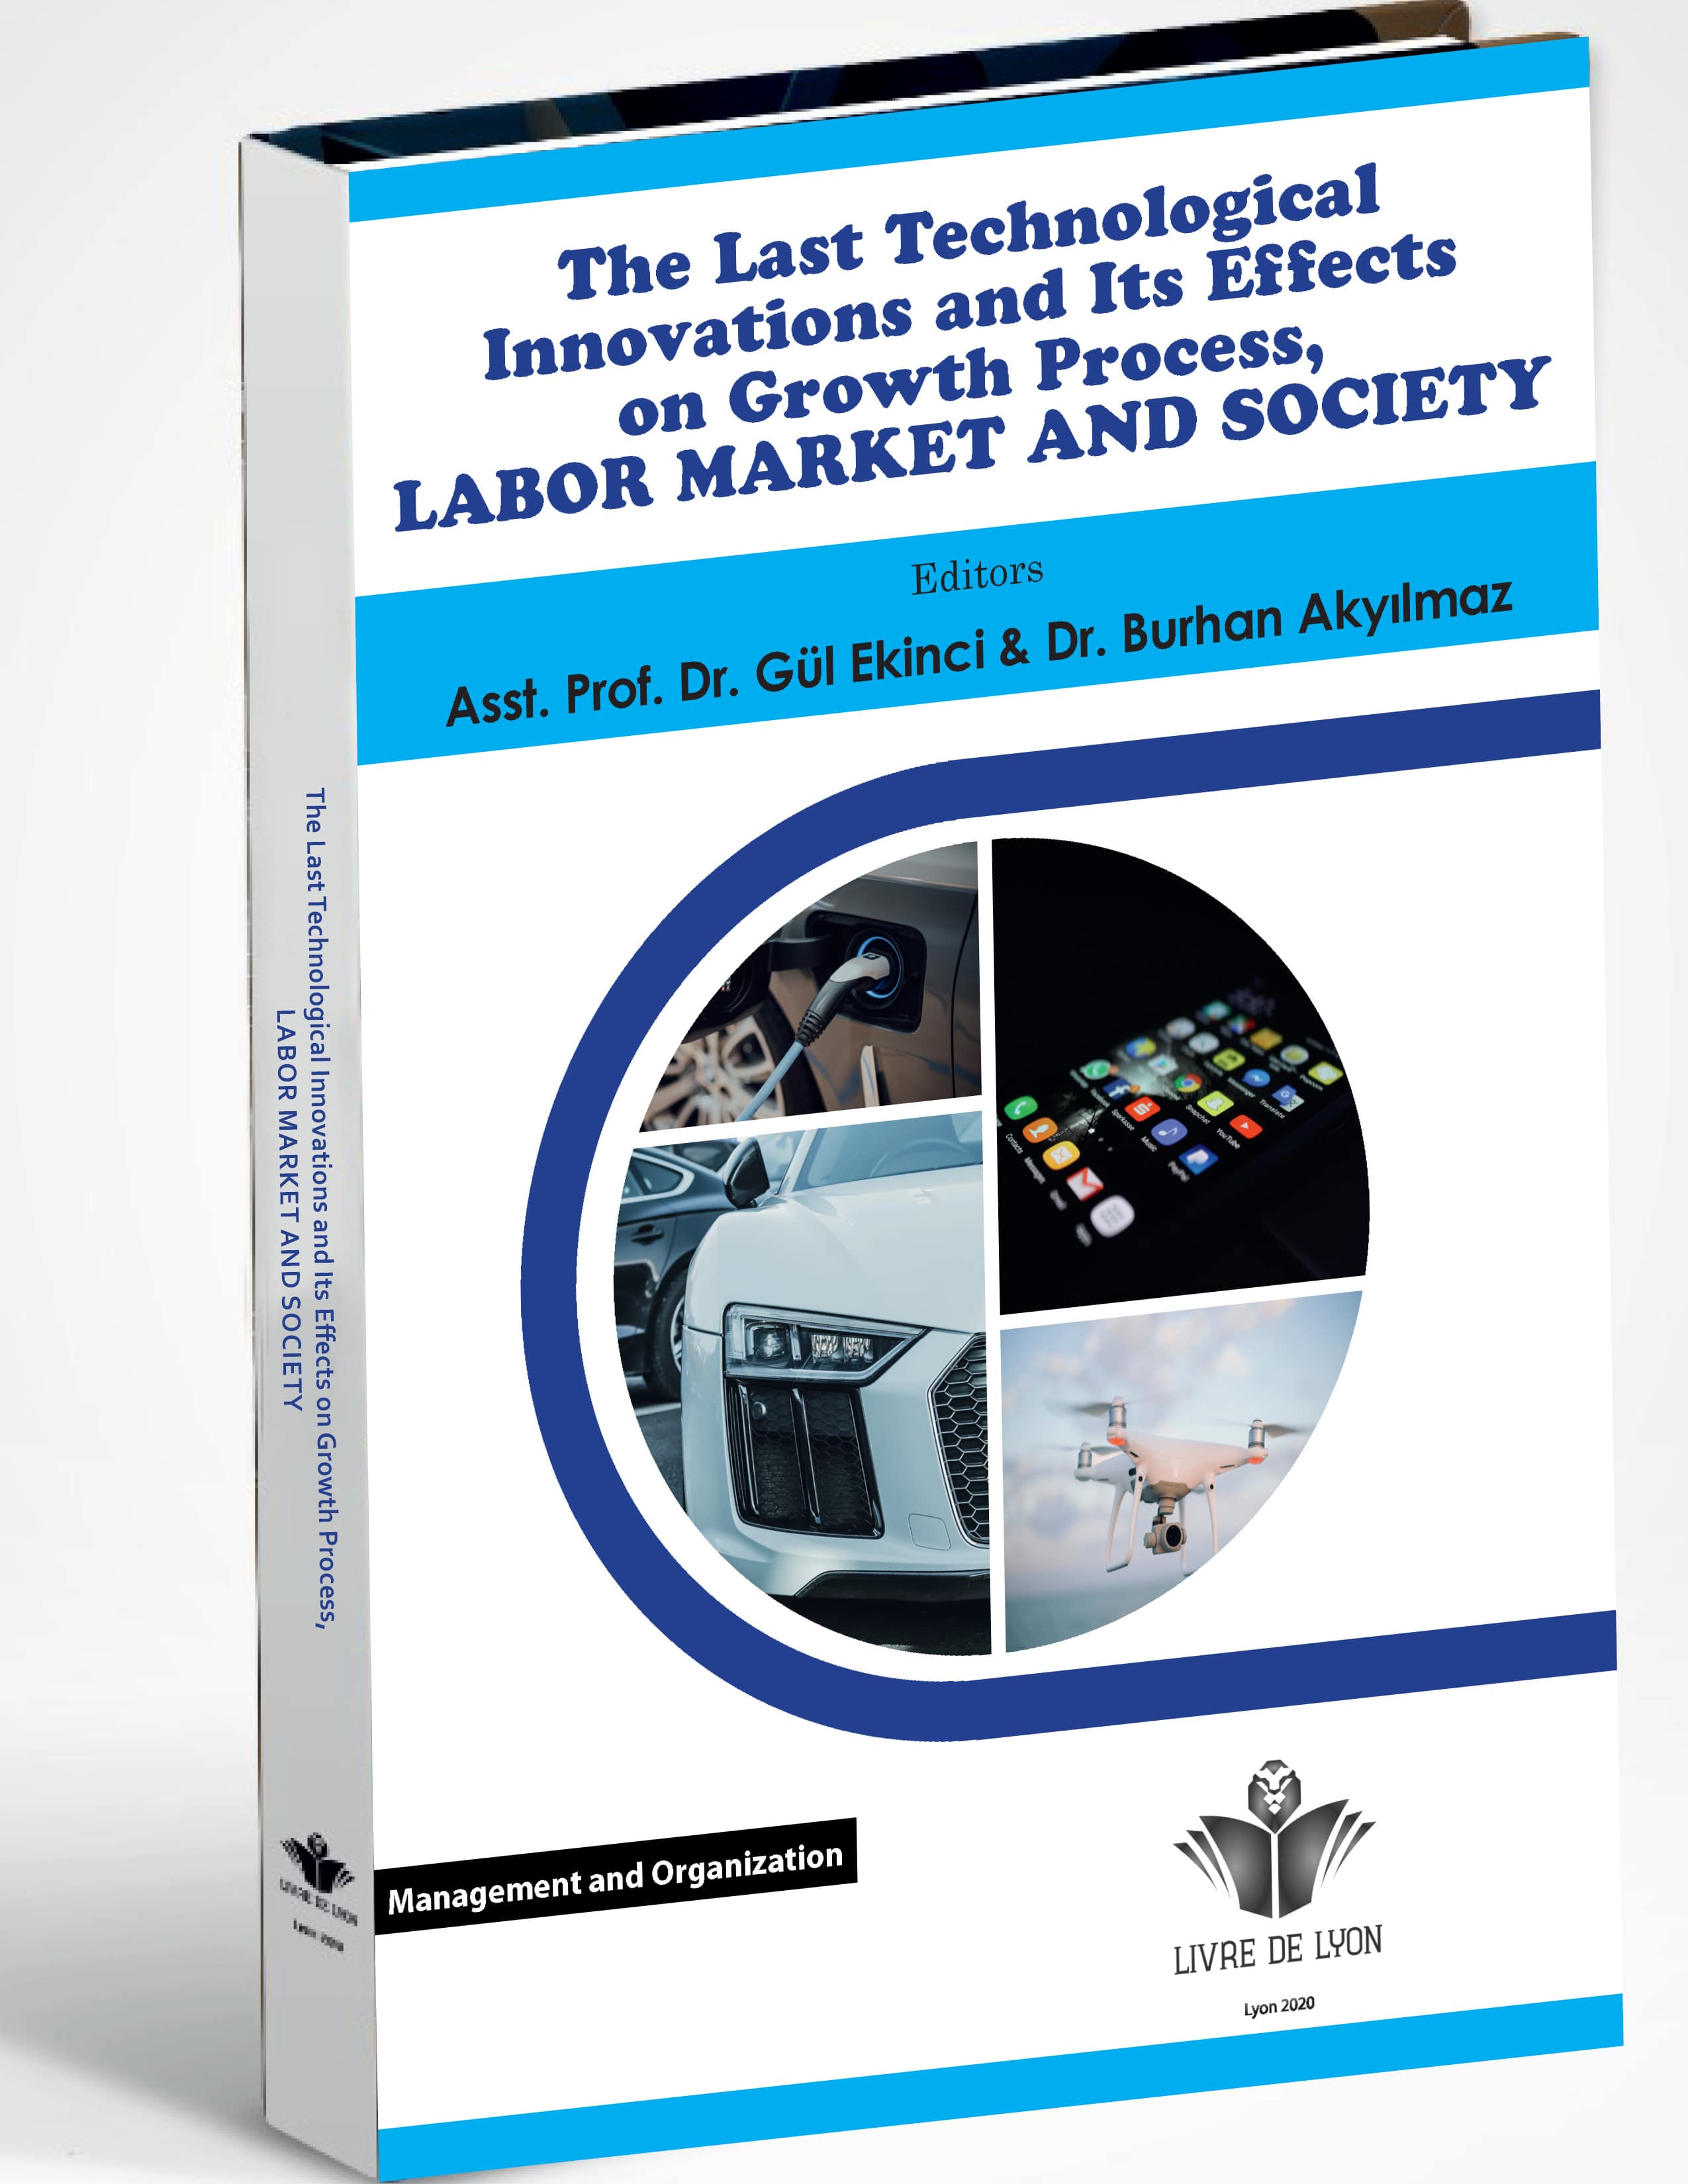 The Last Technological Innovations and Its Effects on Growth Process, Labor Market and Society